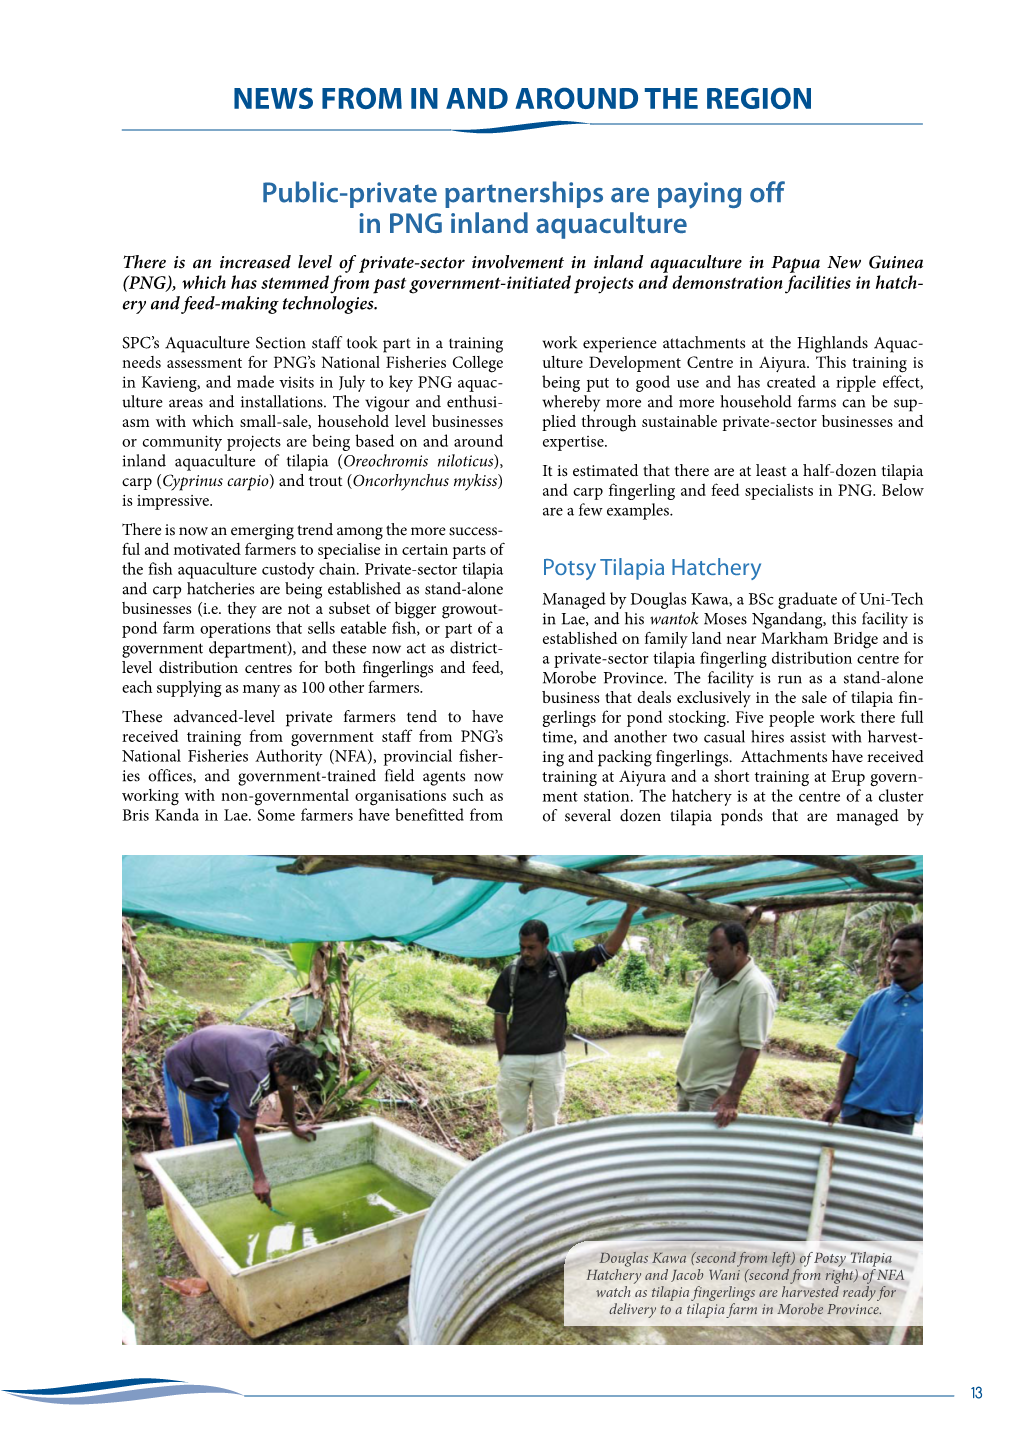 Public-Private Partnerships Are Paying Off in PNG Inland Aquaculture